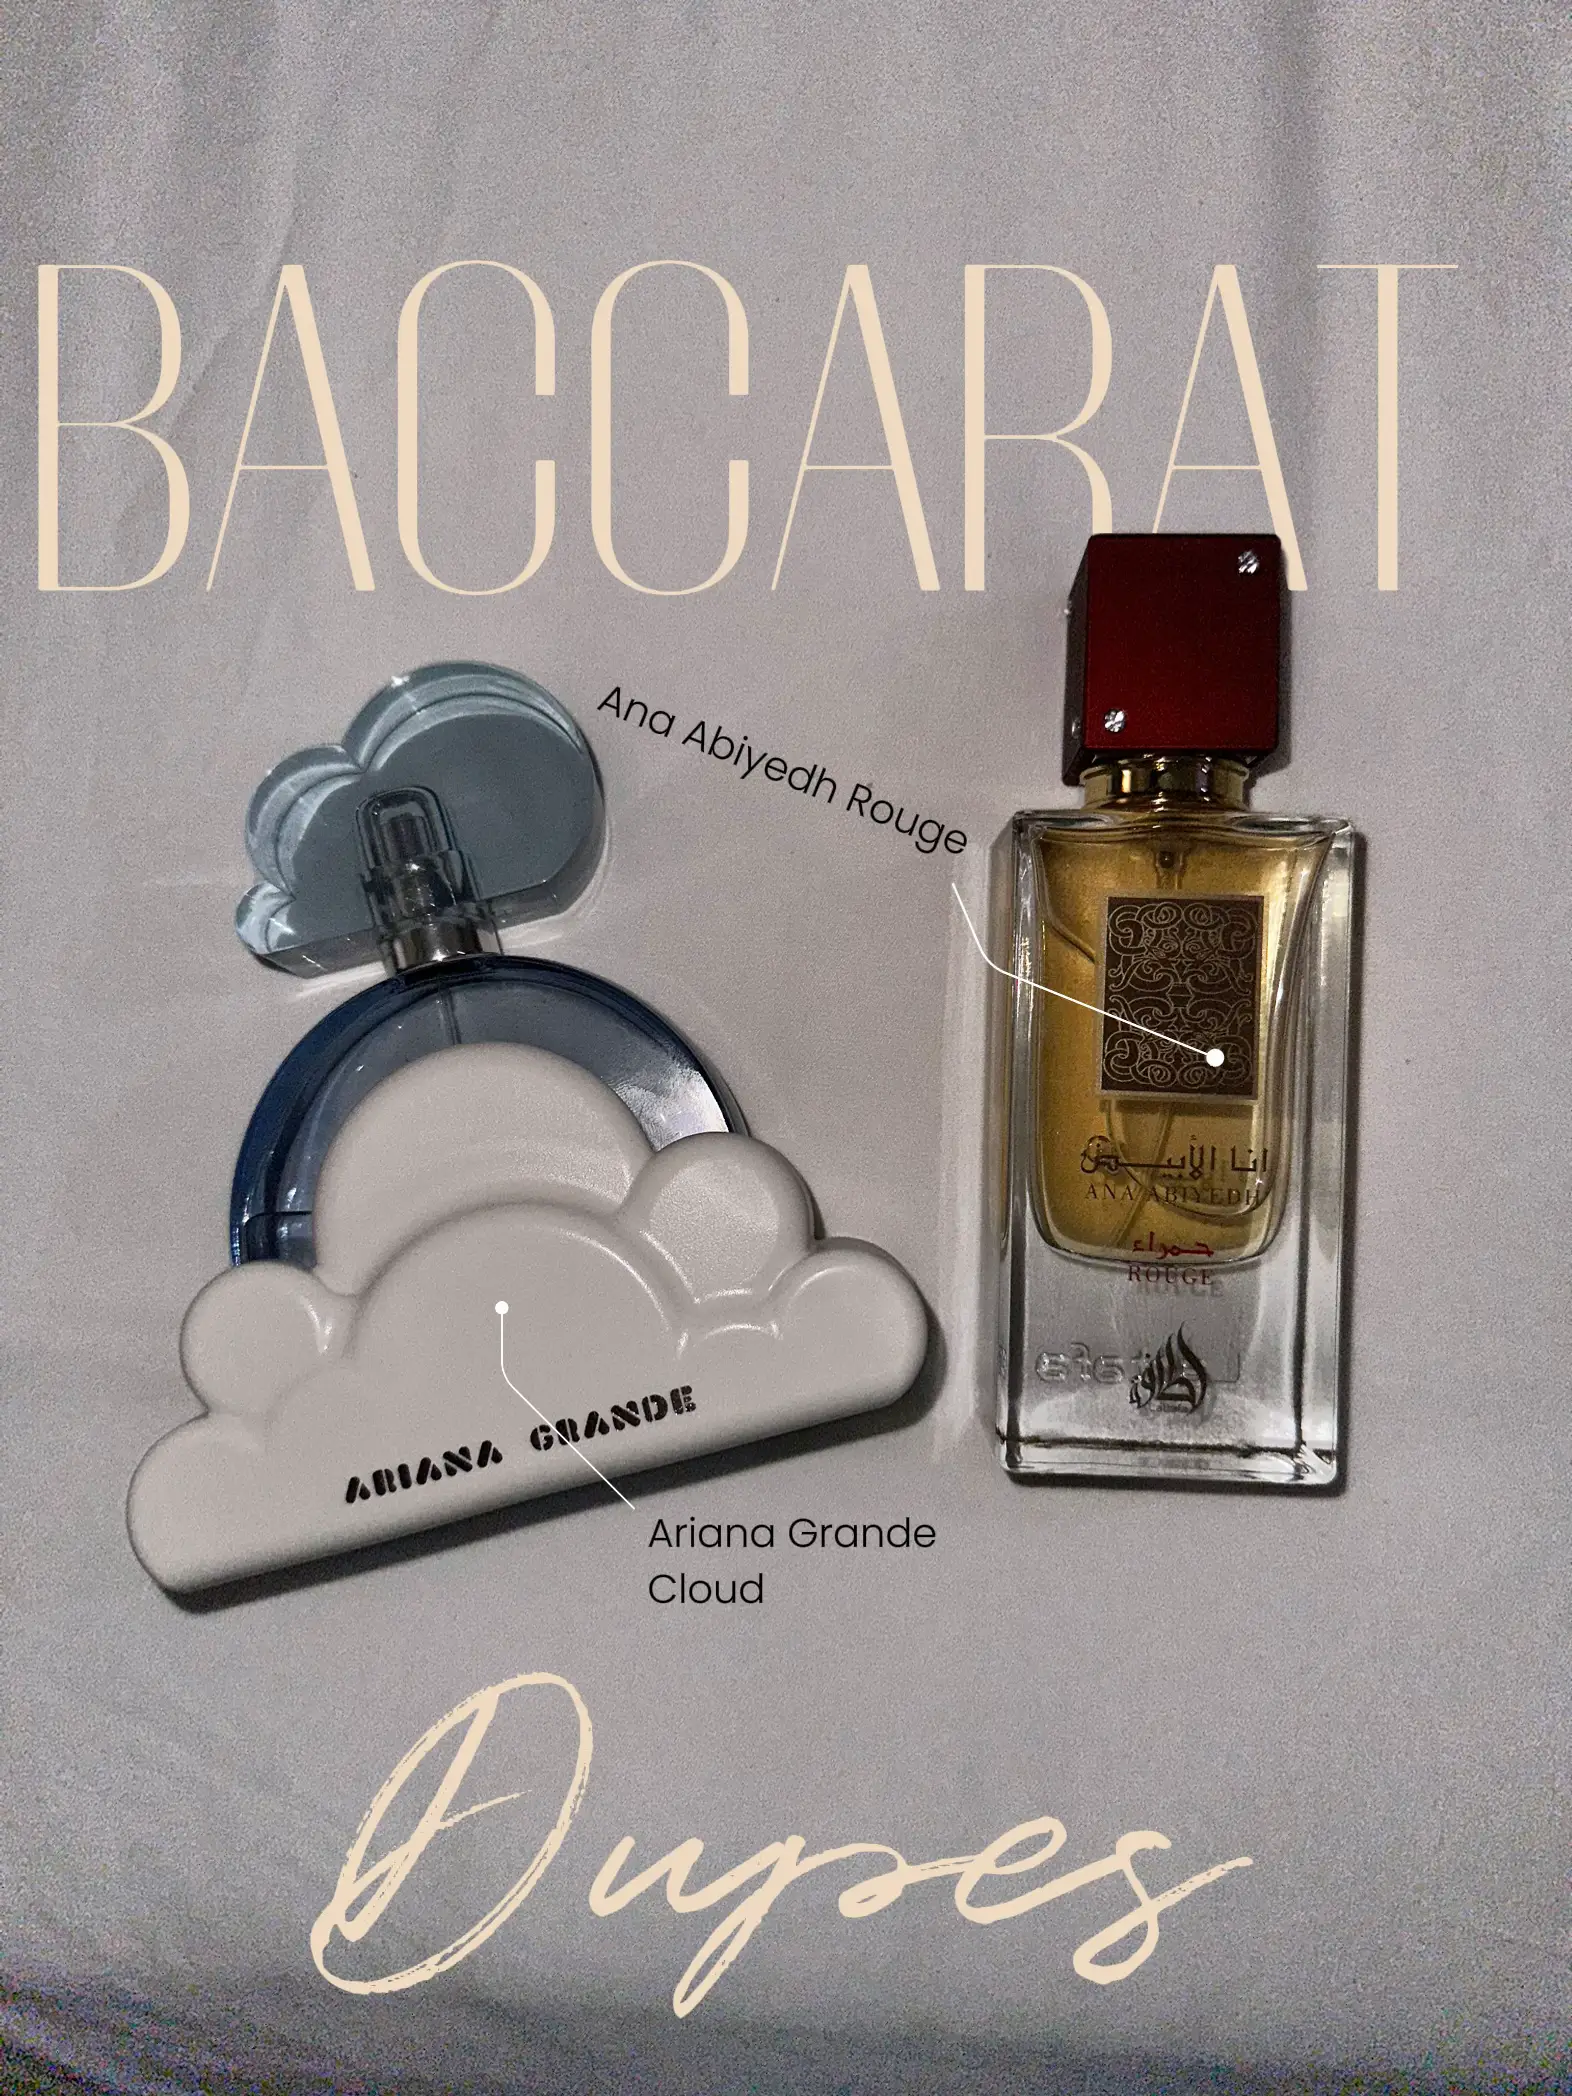 Zara Perfume Is Going Viral on Tiktok & Fans Say It a Dupe of the $325  Baccarat Rouge 540